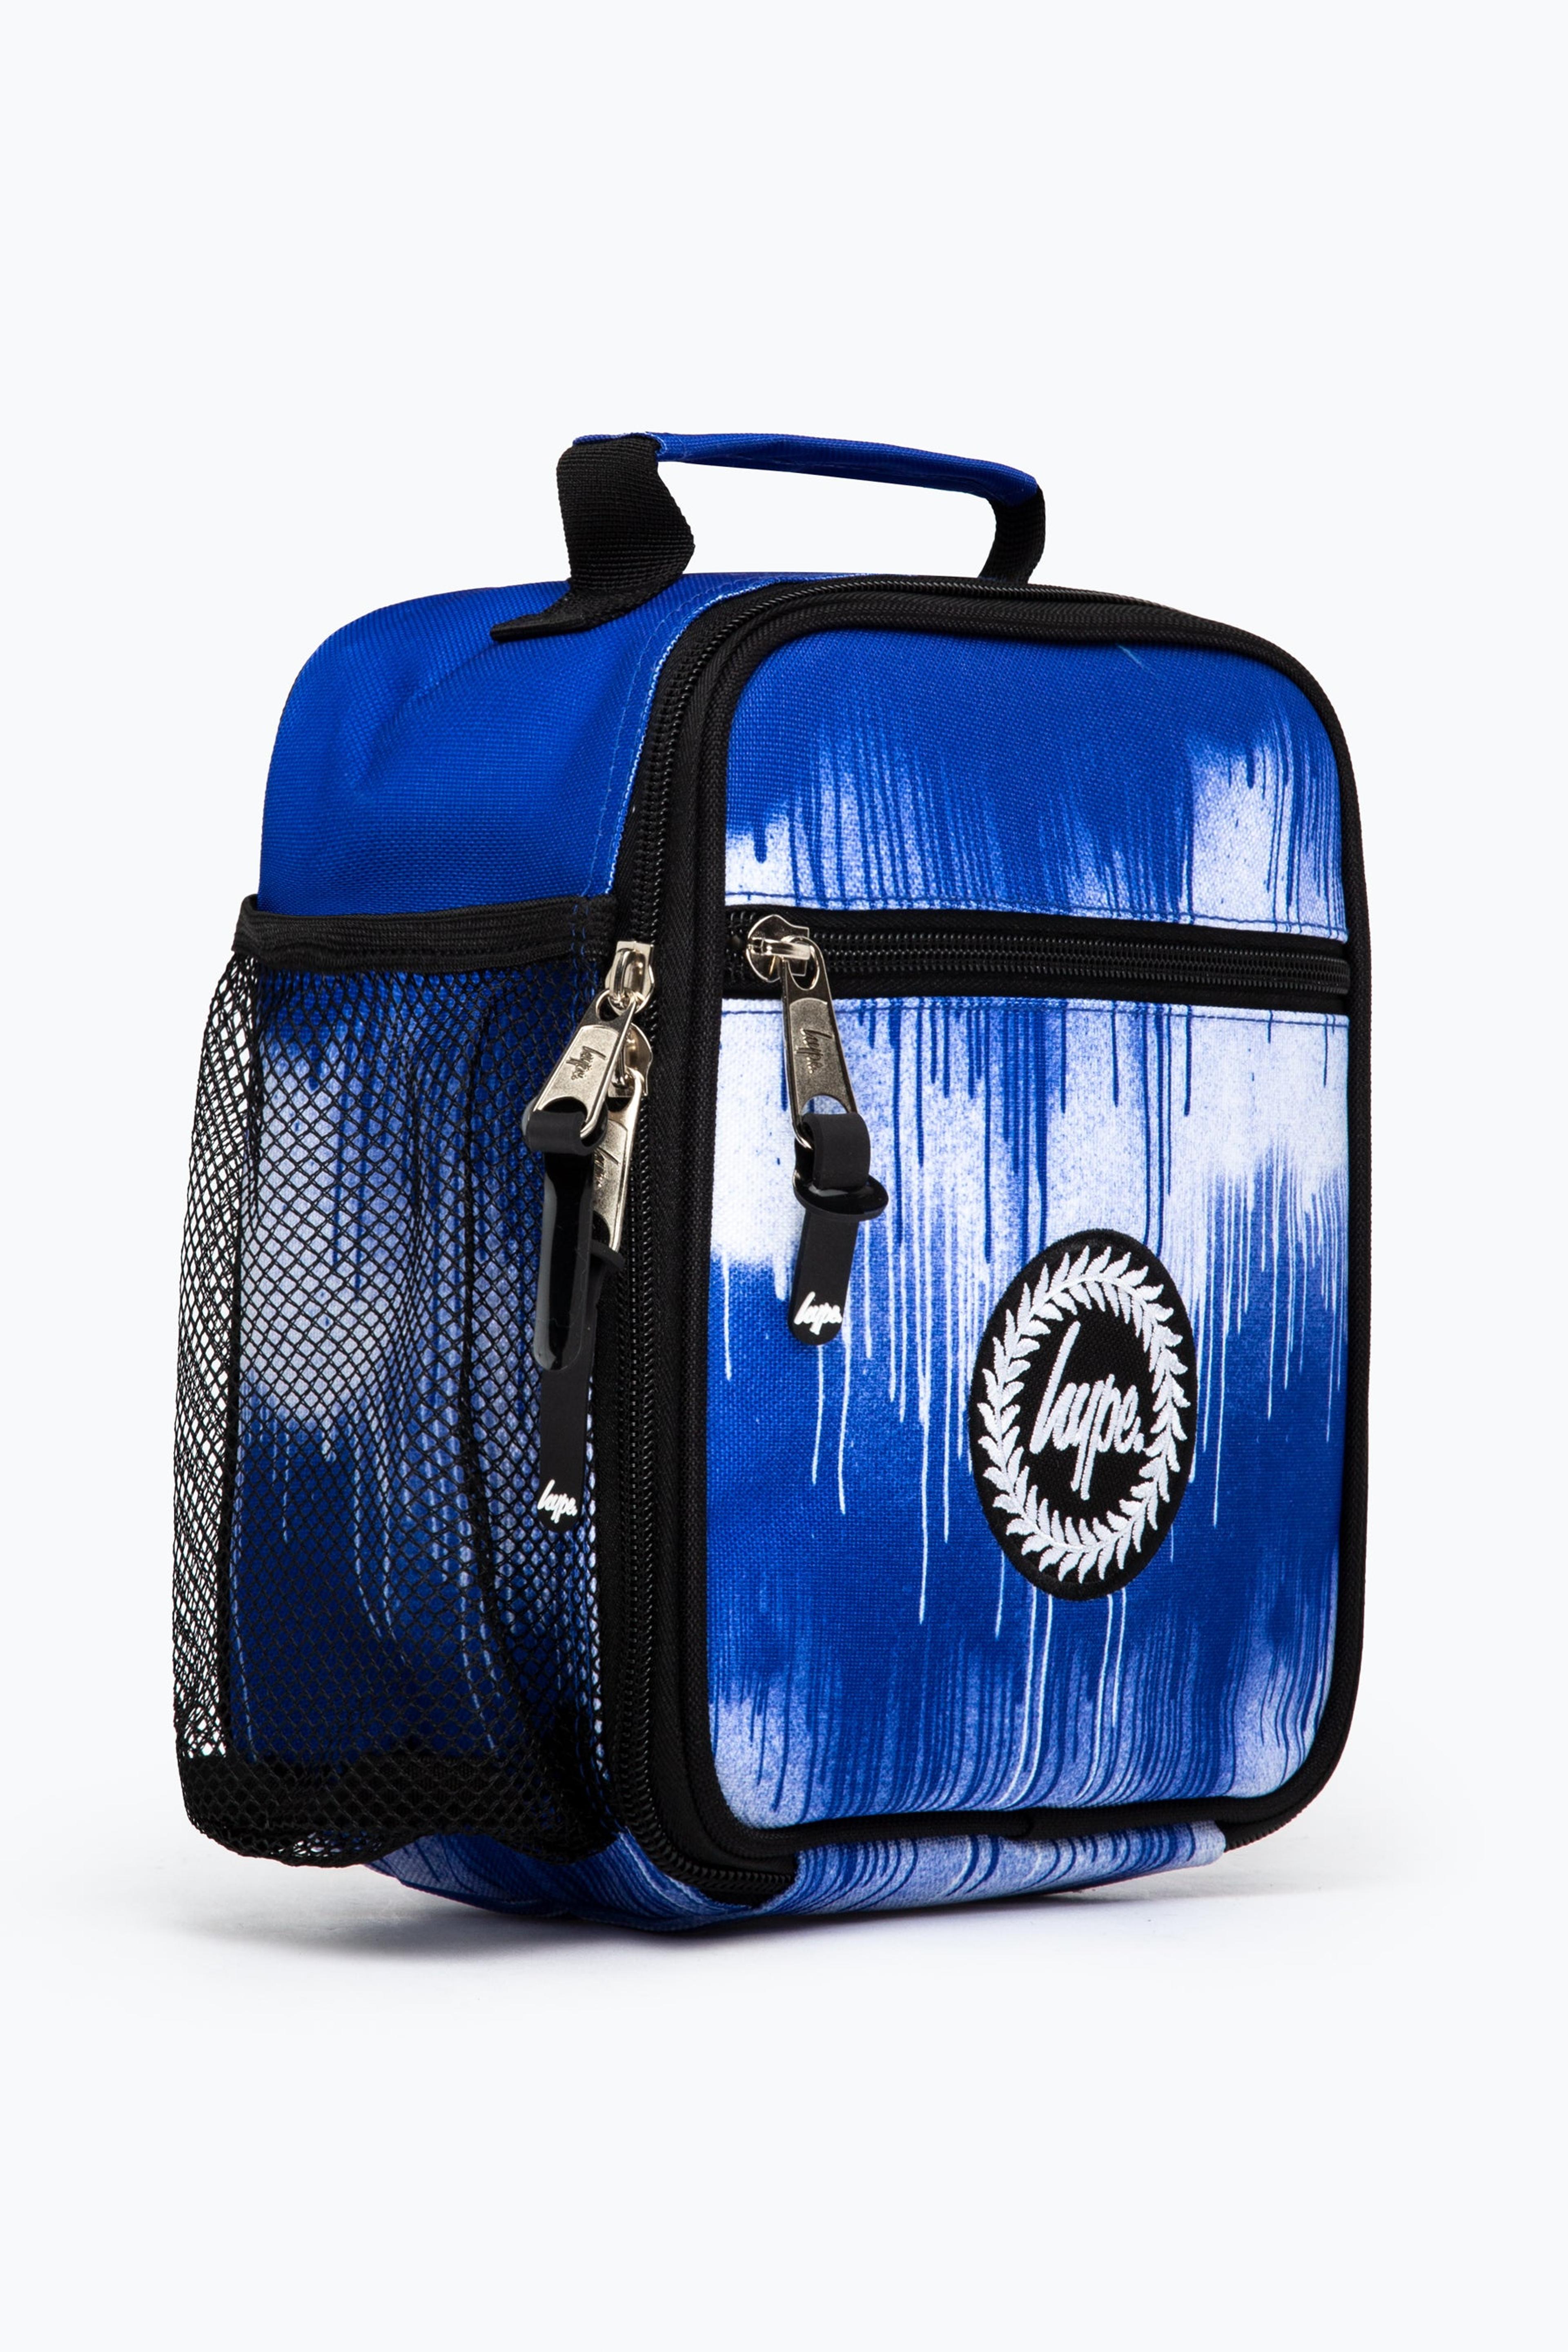 Alternate View 1 of HYPE ROYAL BLUE SINGLE DRIP LUNCHBOX